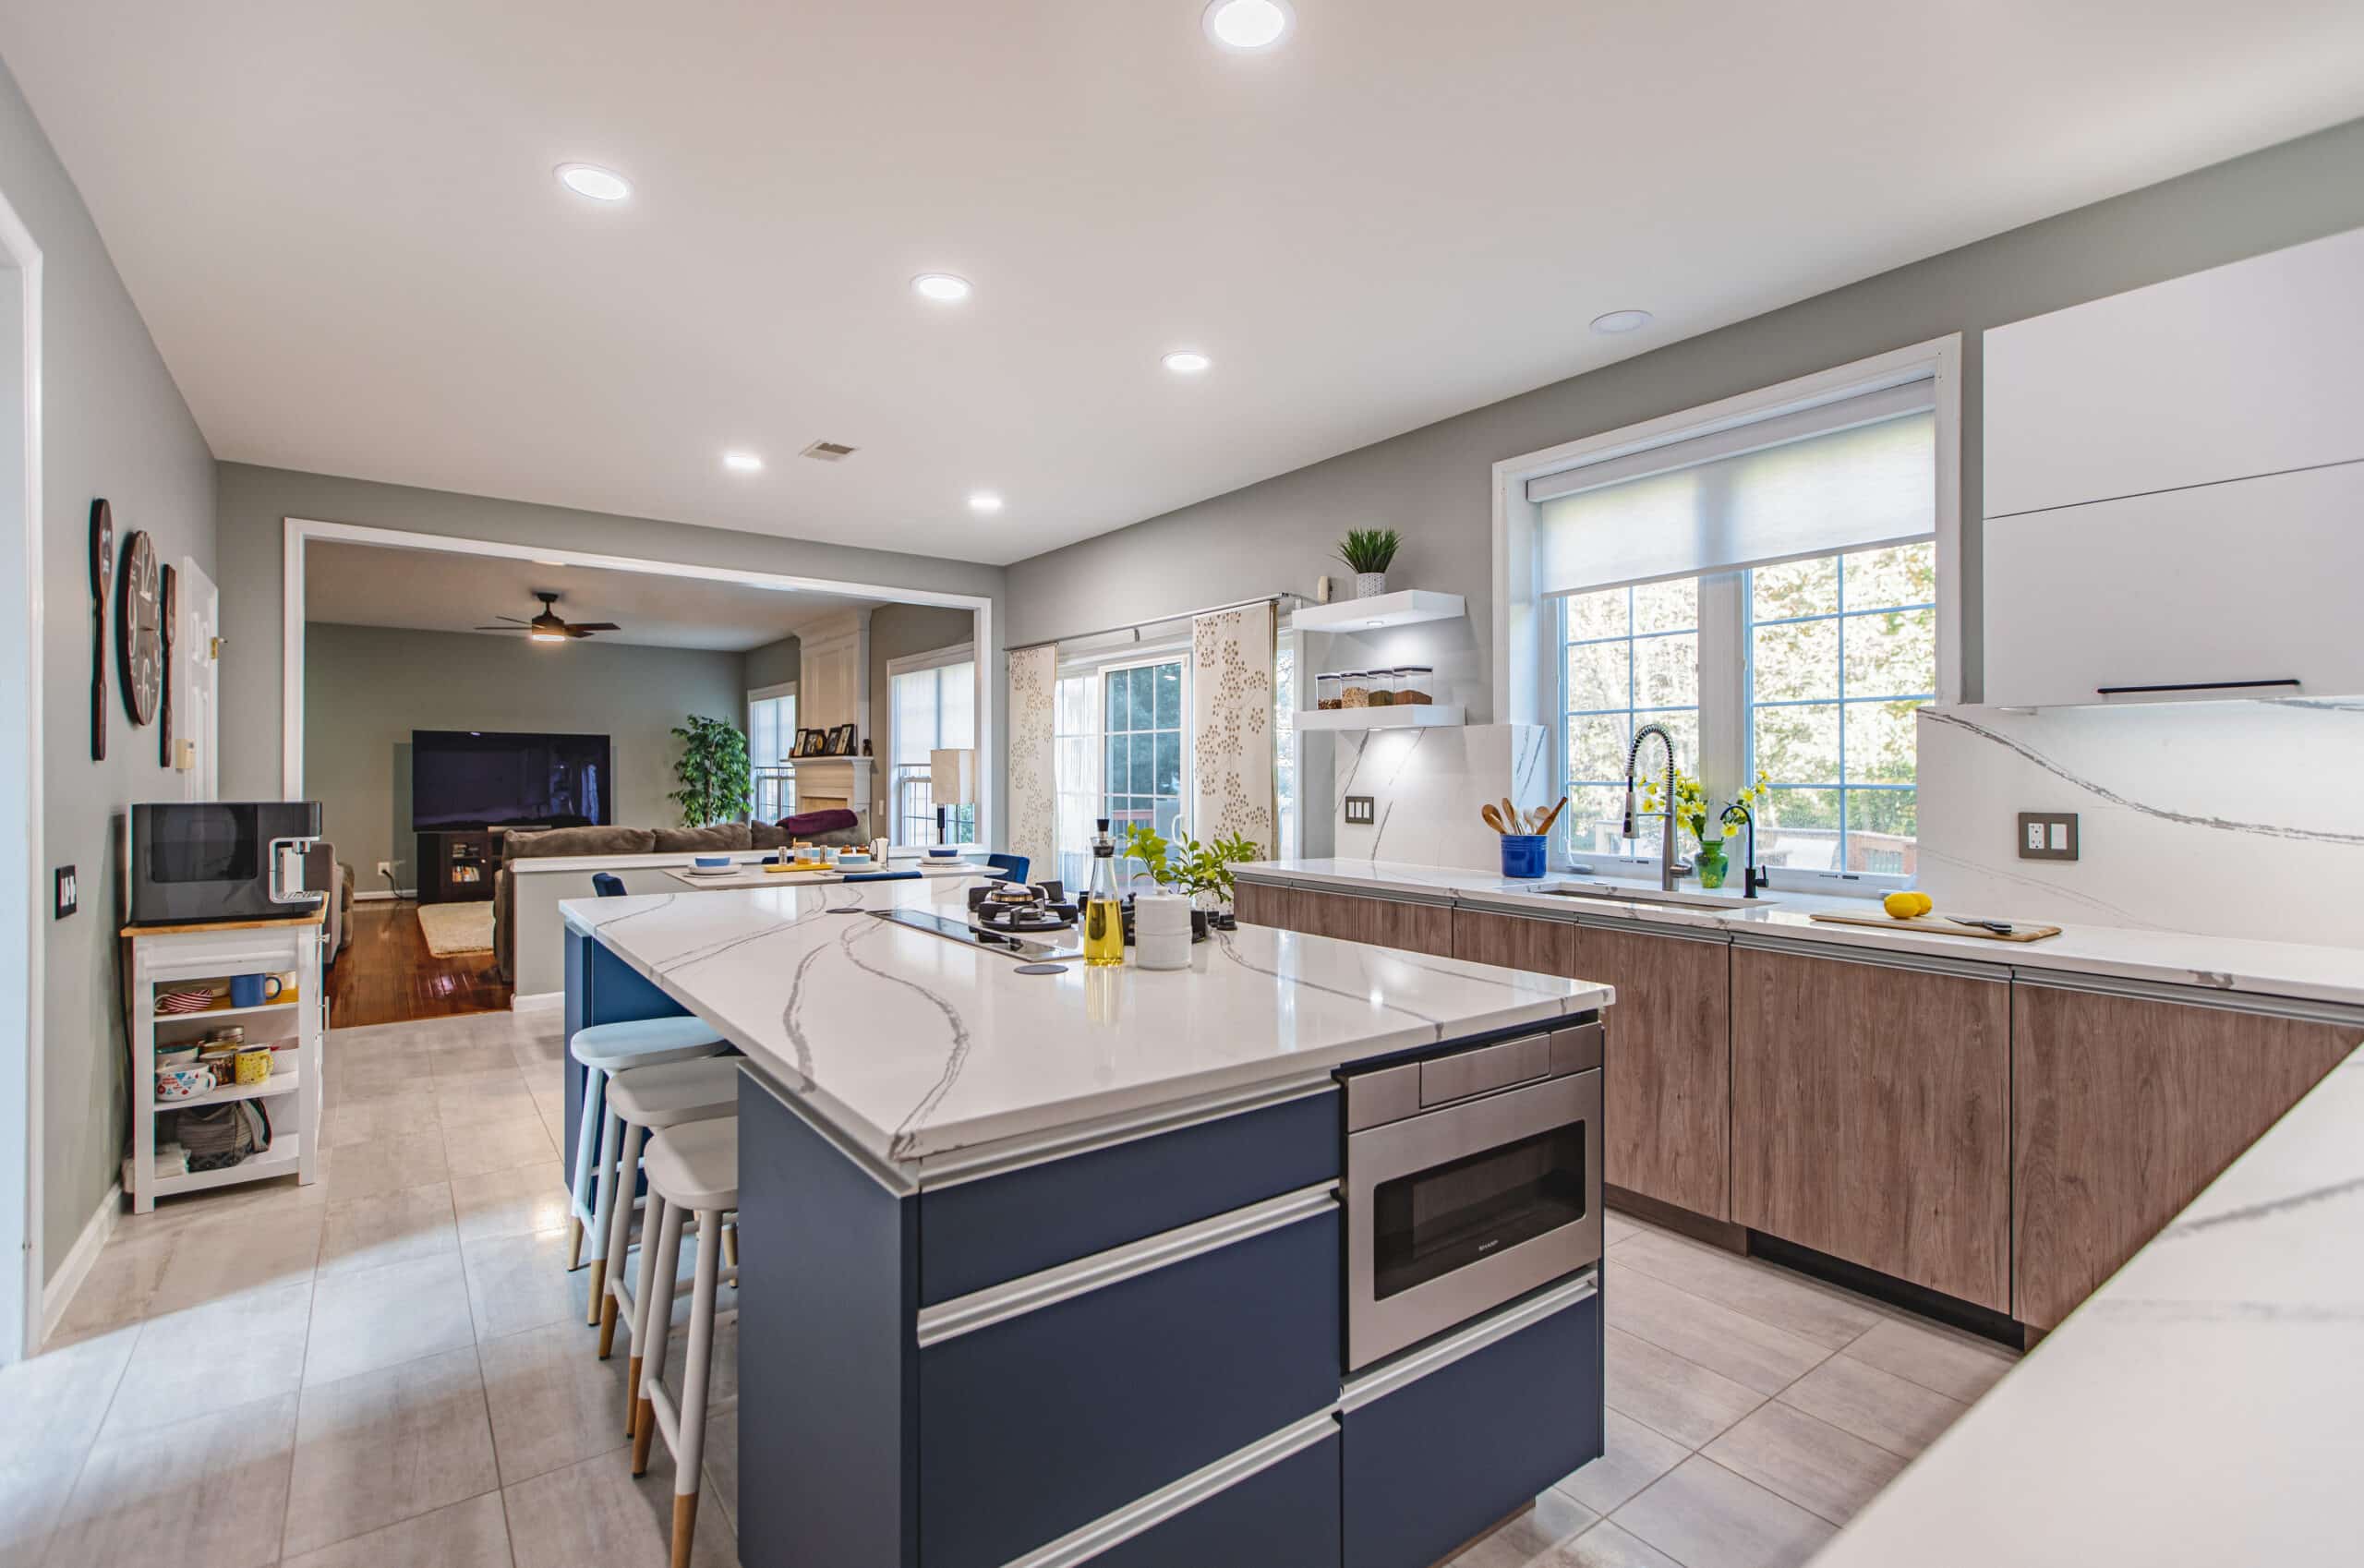 A spacious kitchen featuring a sizable island and ample counter